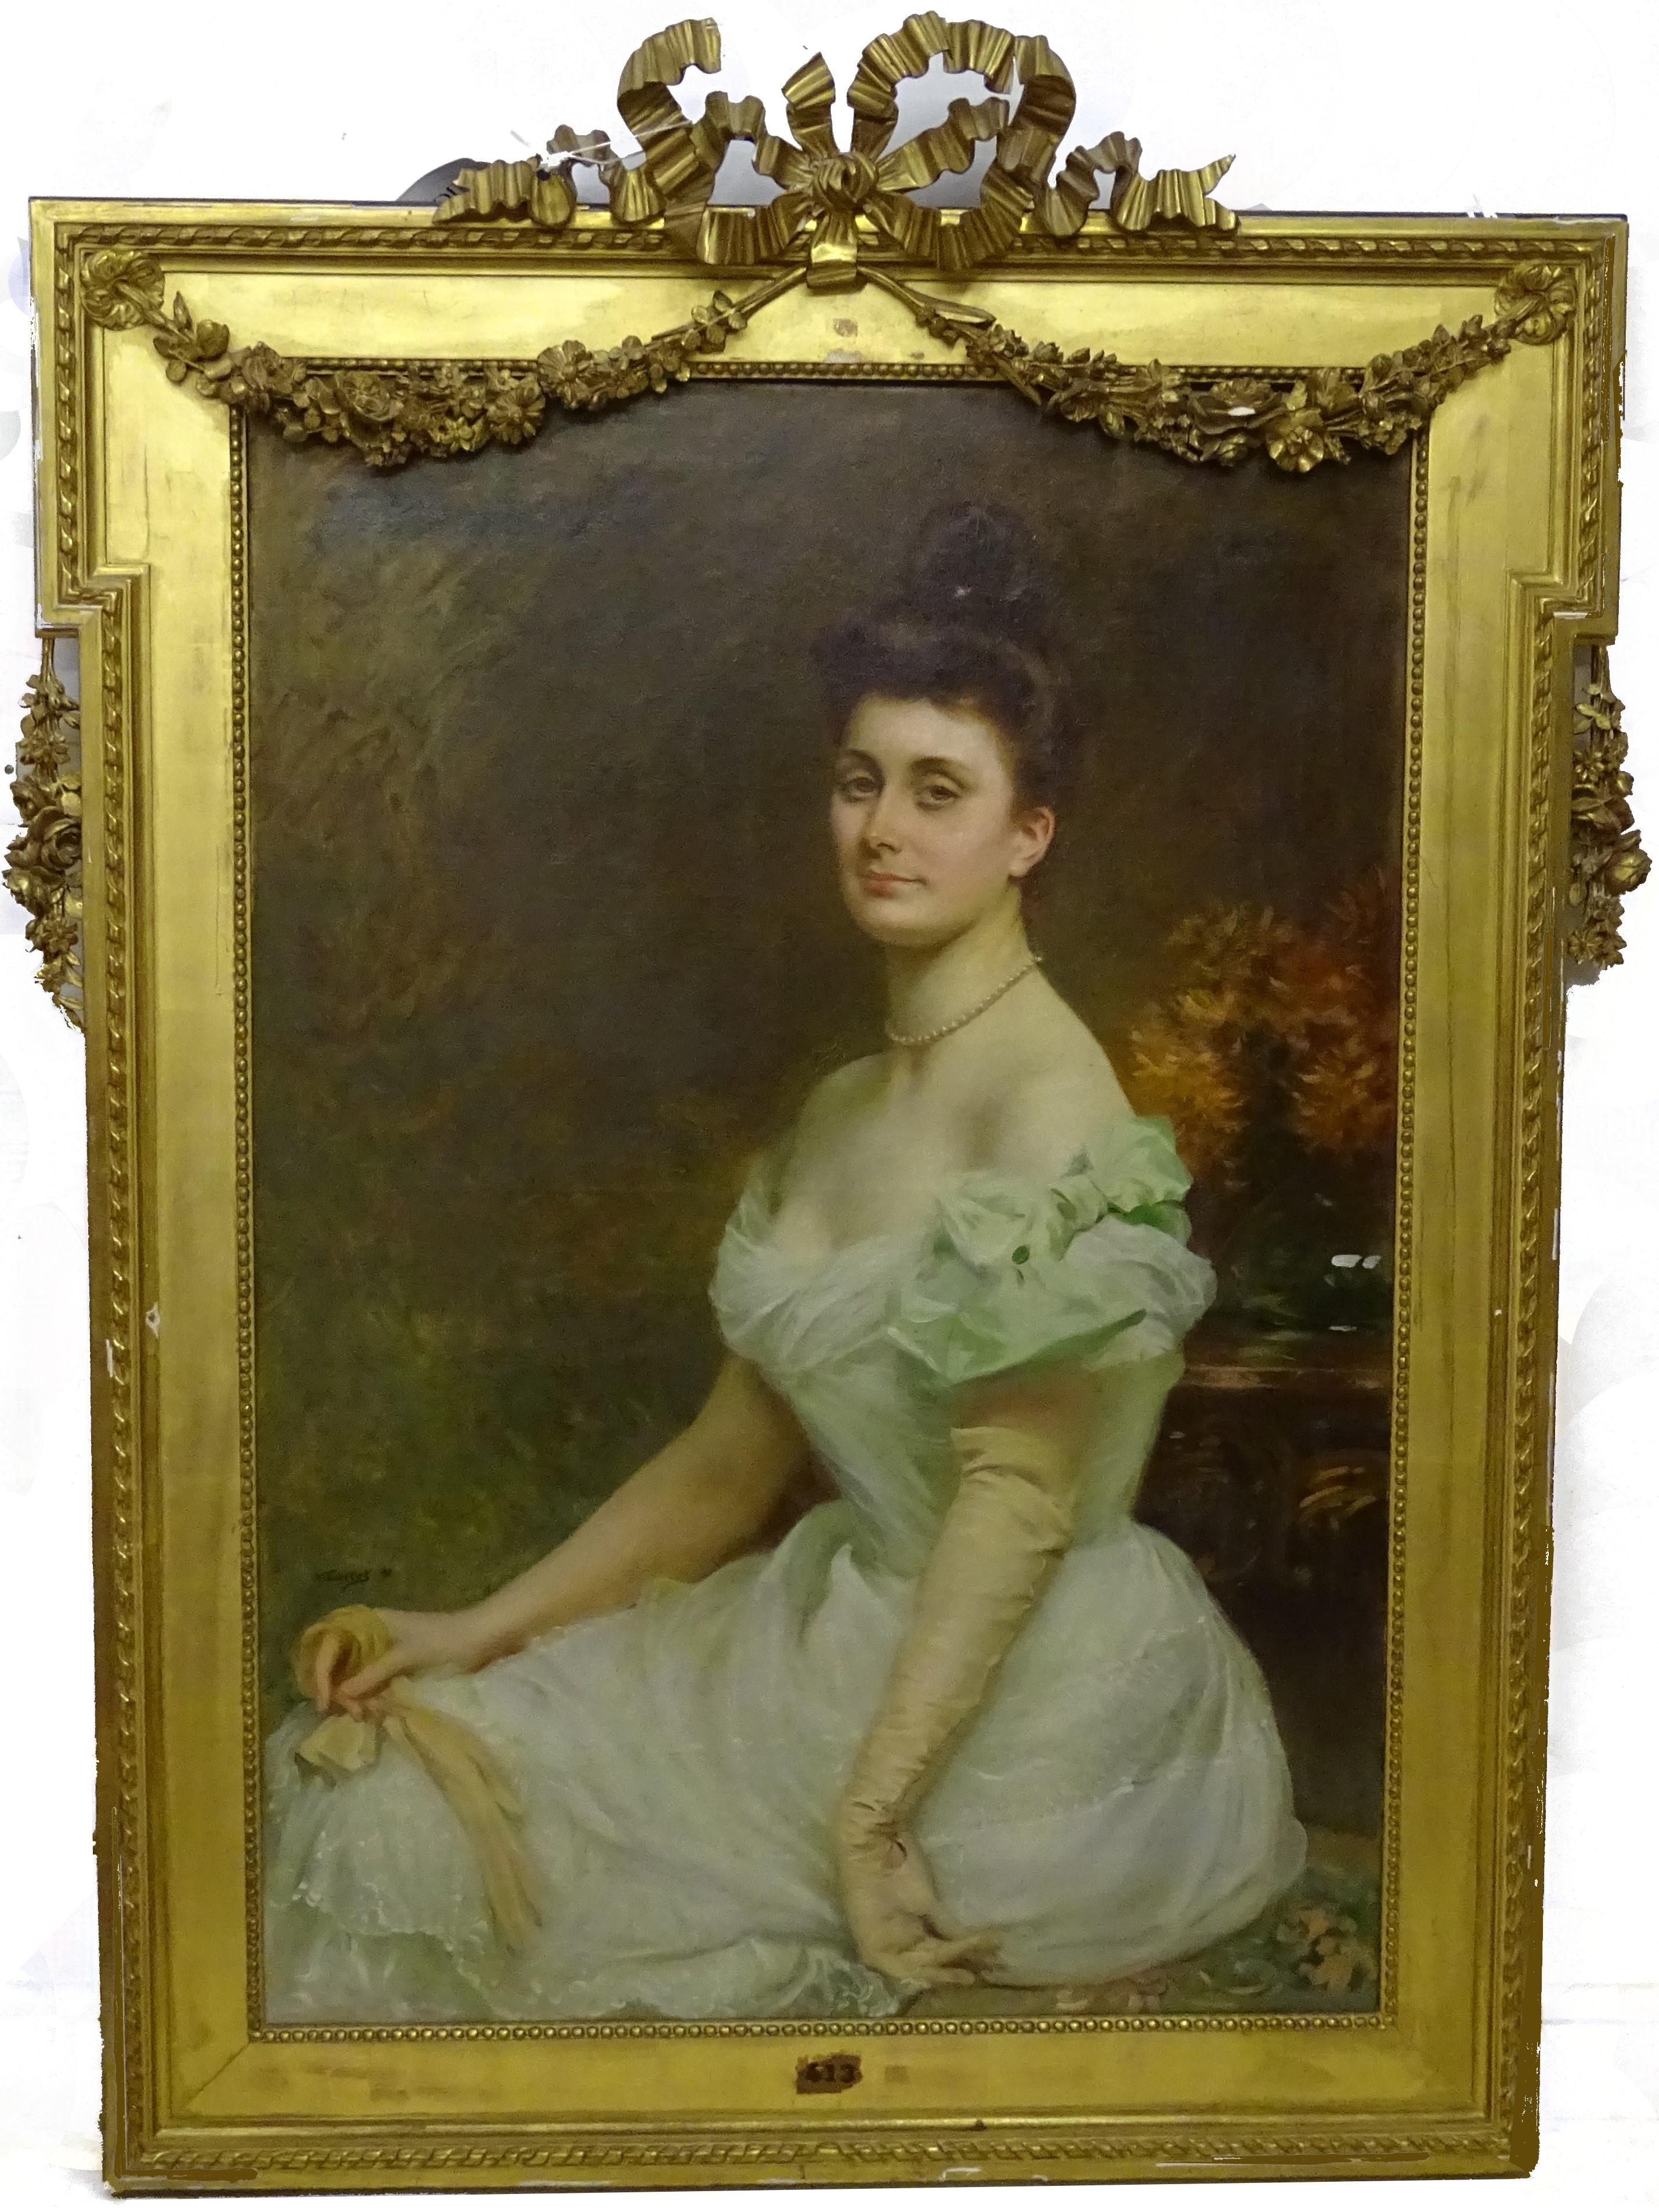 Oil painting on canvas depicting portrait of Nobildonna, French school late 19th century.

The painting of extraordinary naturalistic rendering, stands out for the marked photographic accuracy intended to investigate the feminine soul and the